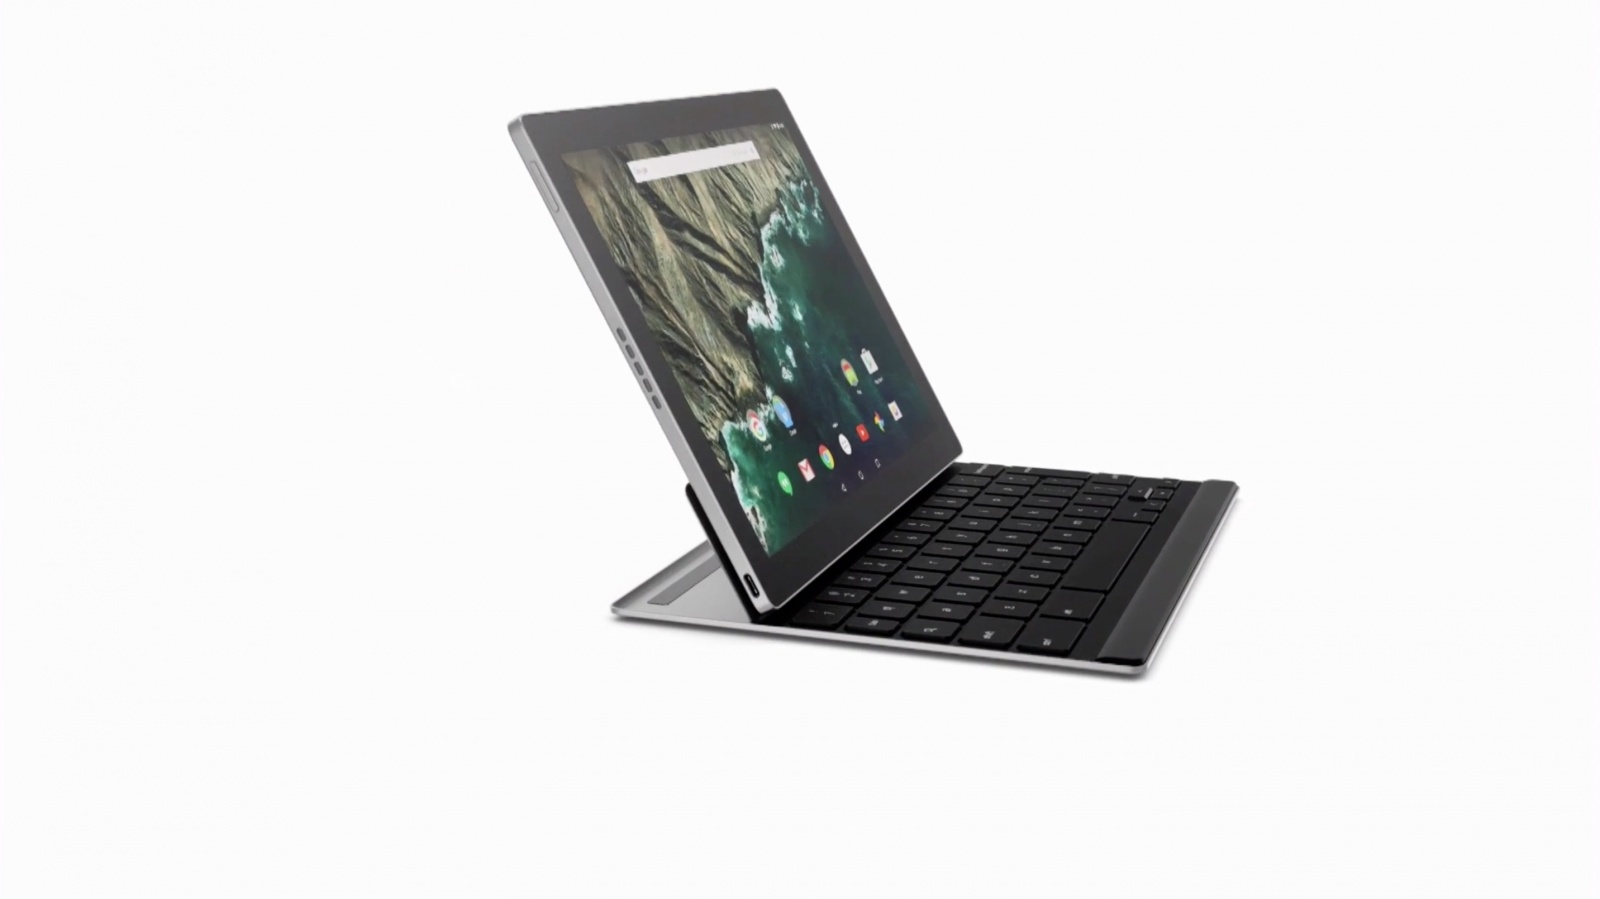 google-surprises-us-with-an-ipad-pro-competitor-called-pixel-c-image-cultofandroidcomwp-contentuploads201509Pixel-C-jpg